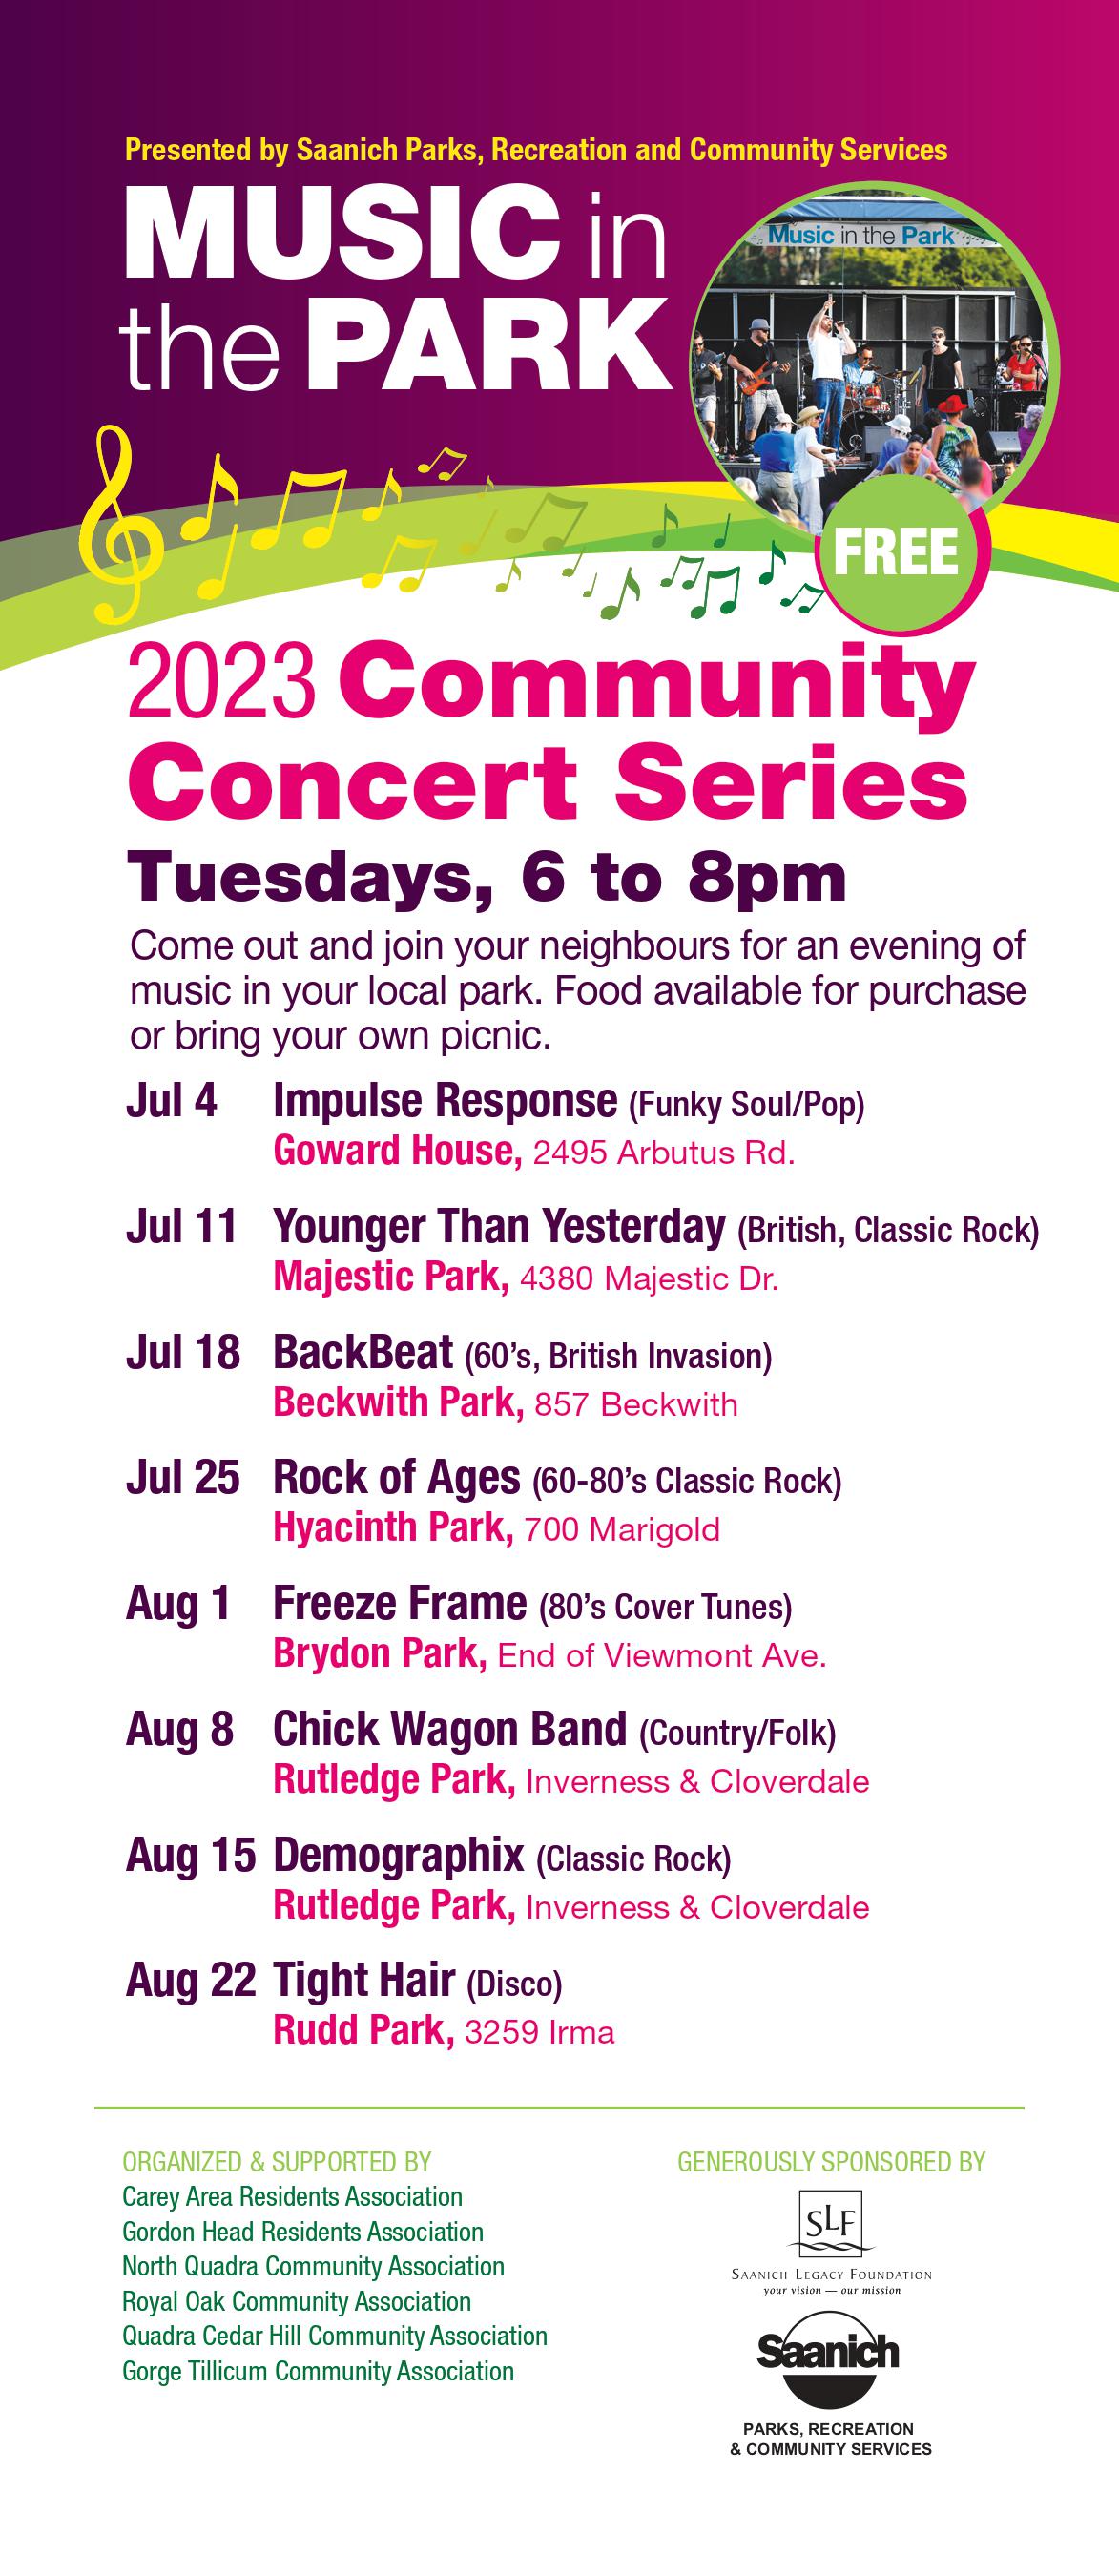 Music in the Park 2023 Schedule